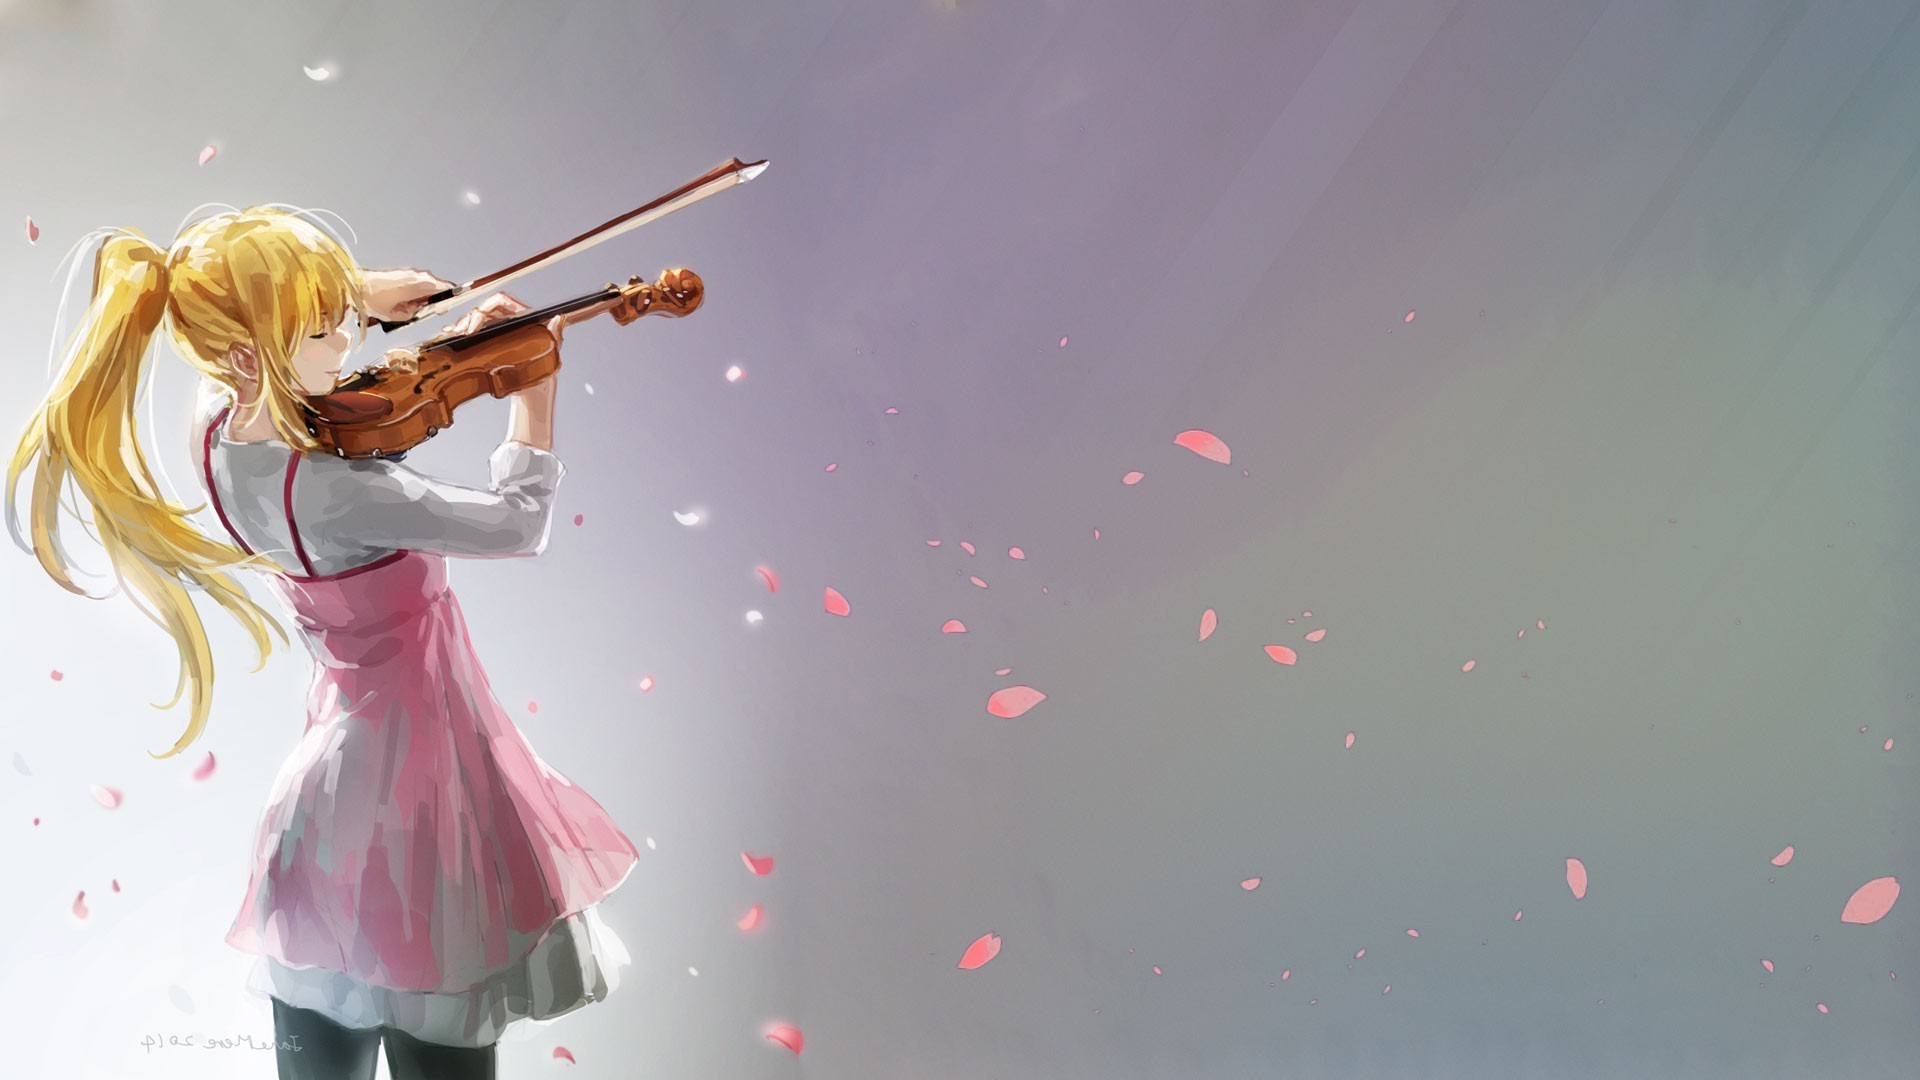 1920x1080 22 best Music -Violin- images on Pinterest | Violin, Music and . ...